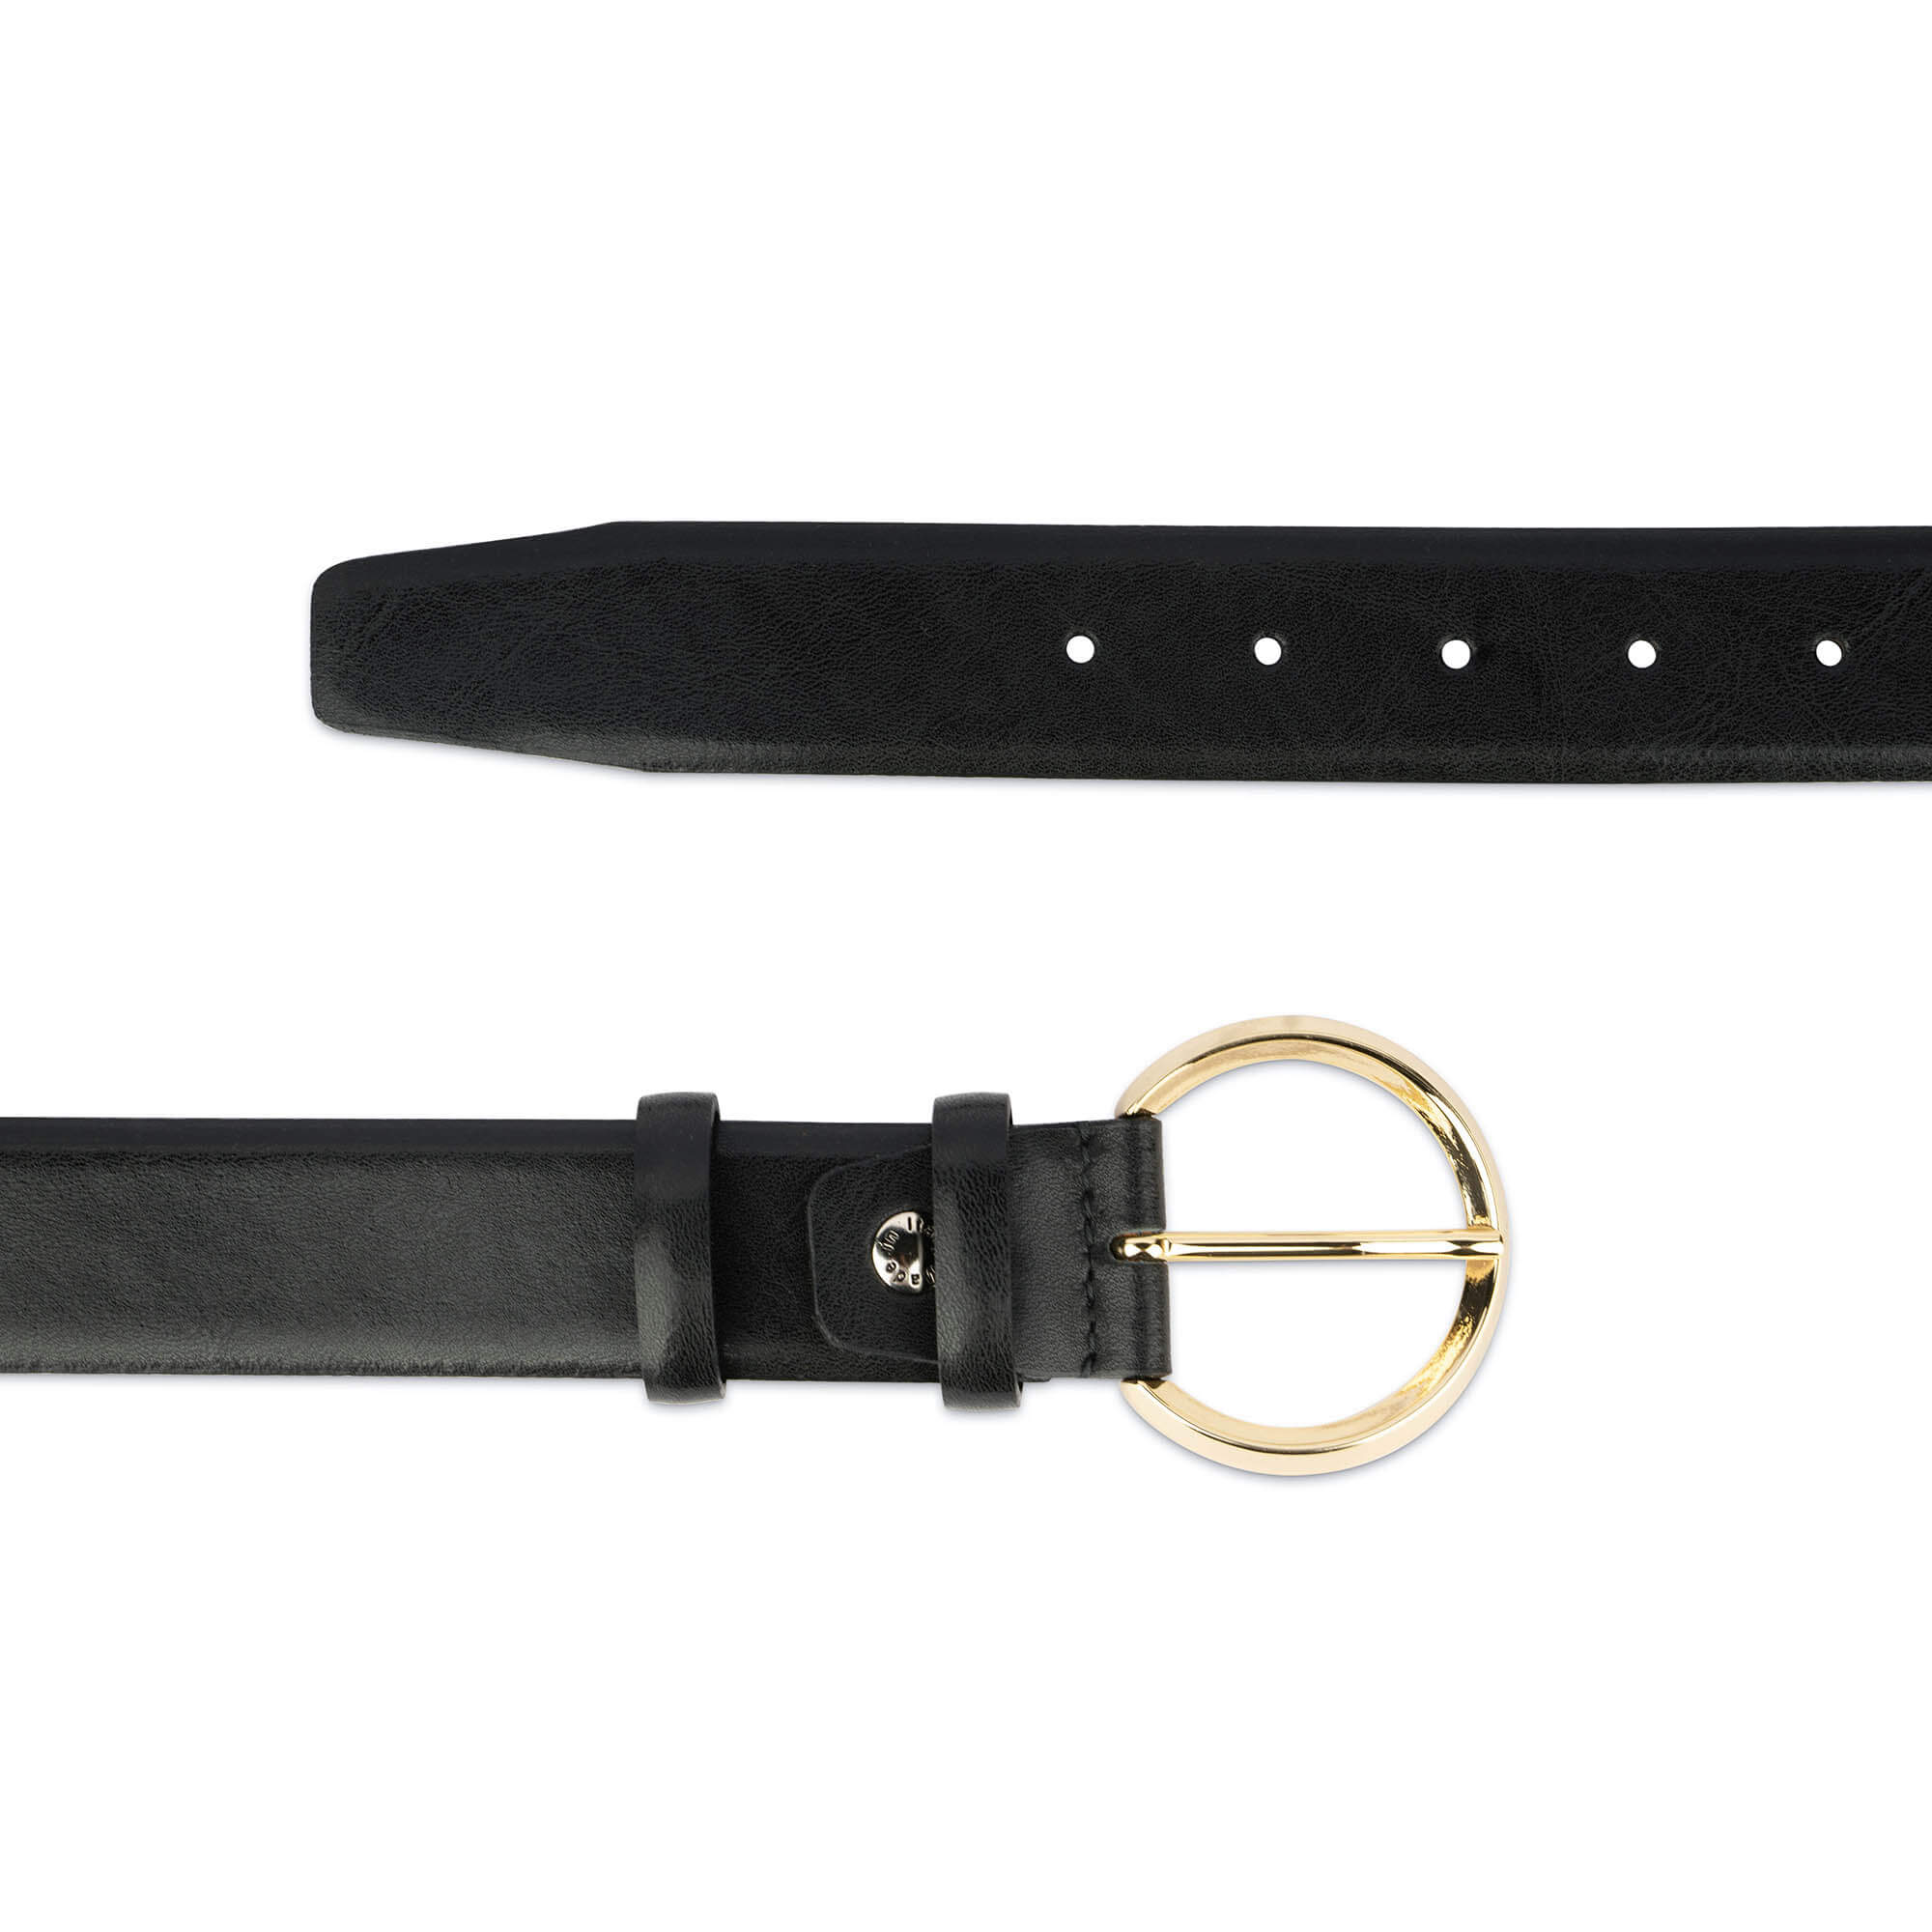 Buy Womens Black Belt With Gold Buckle | 35 Mm Circle | LeatherBelts